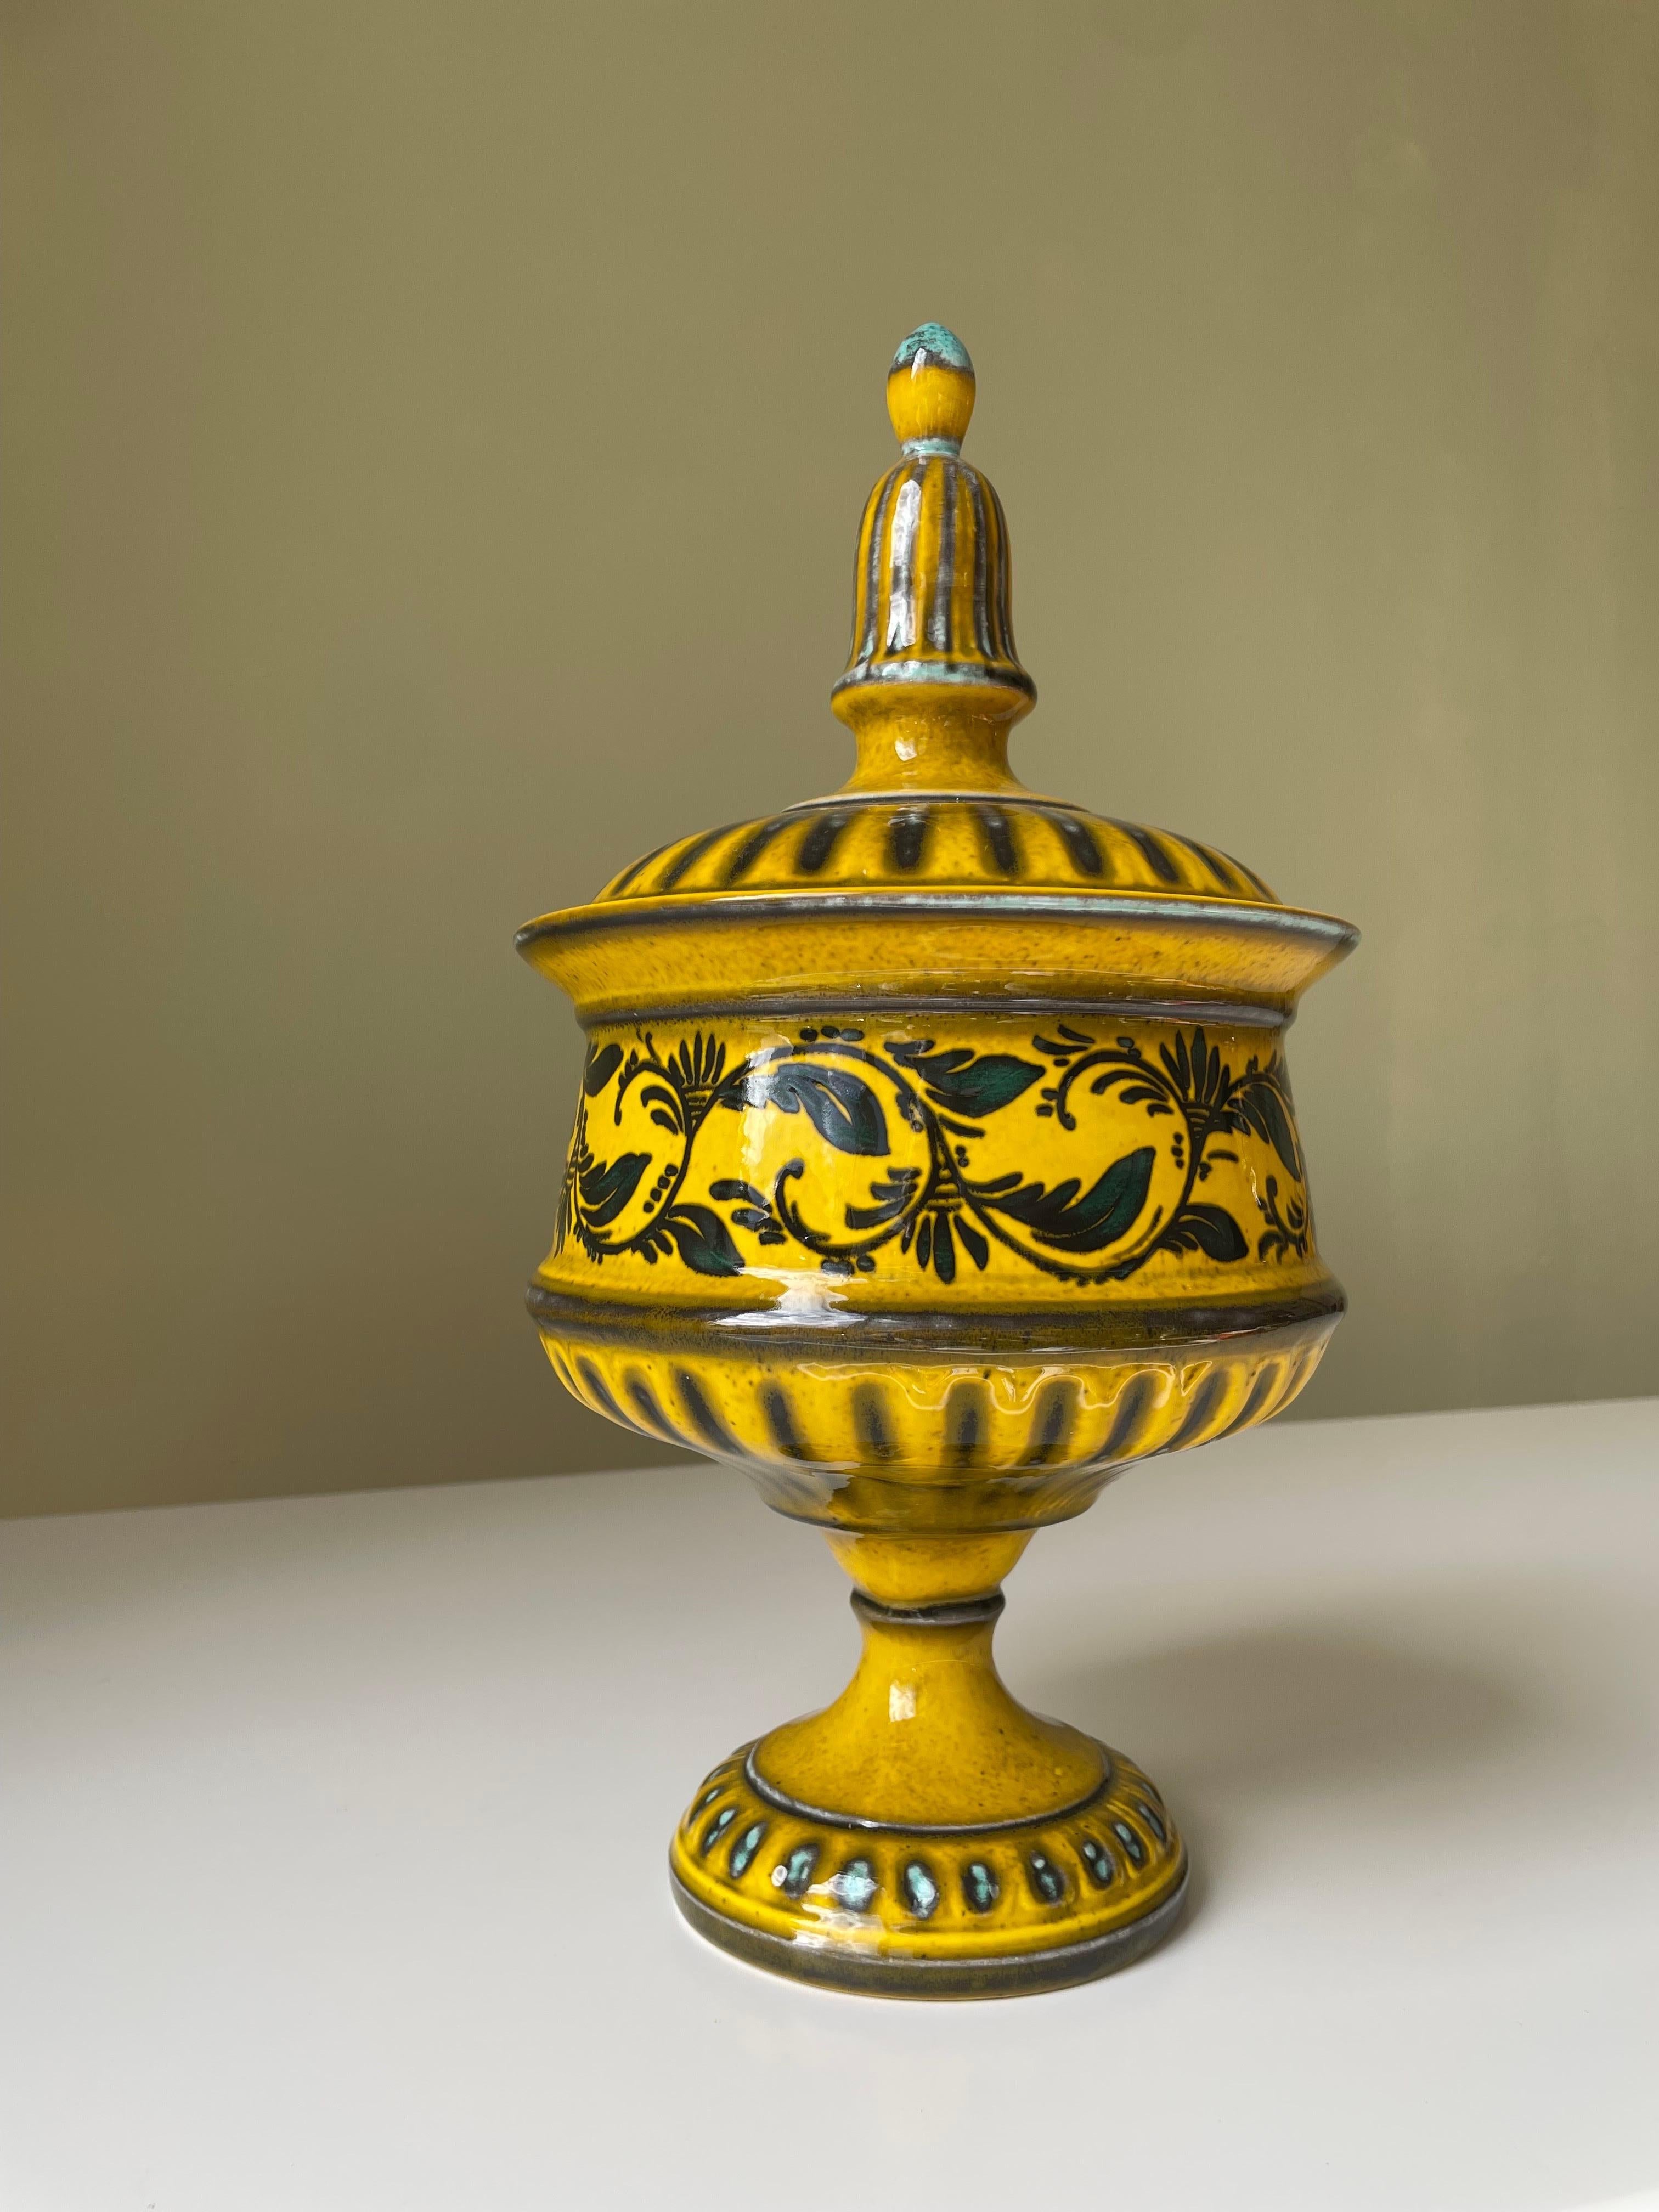 Handmade Italian midcentury art nouveau ceramic lidded urn jar manufactured by Sicas Sesto Fiorentino. Adorned with warm Tuscany yellow, dark green, black and turquoise organic floral and graphic shiny glazed decorations. Vessel stamped under base.